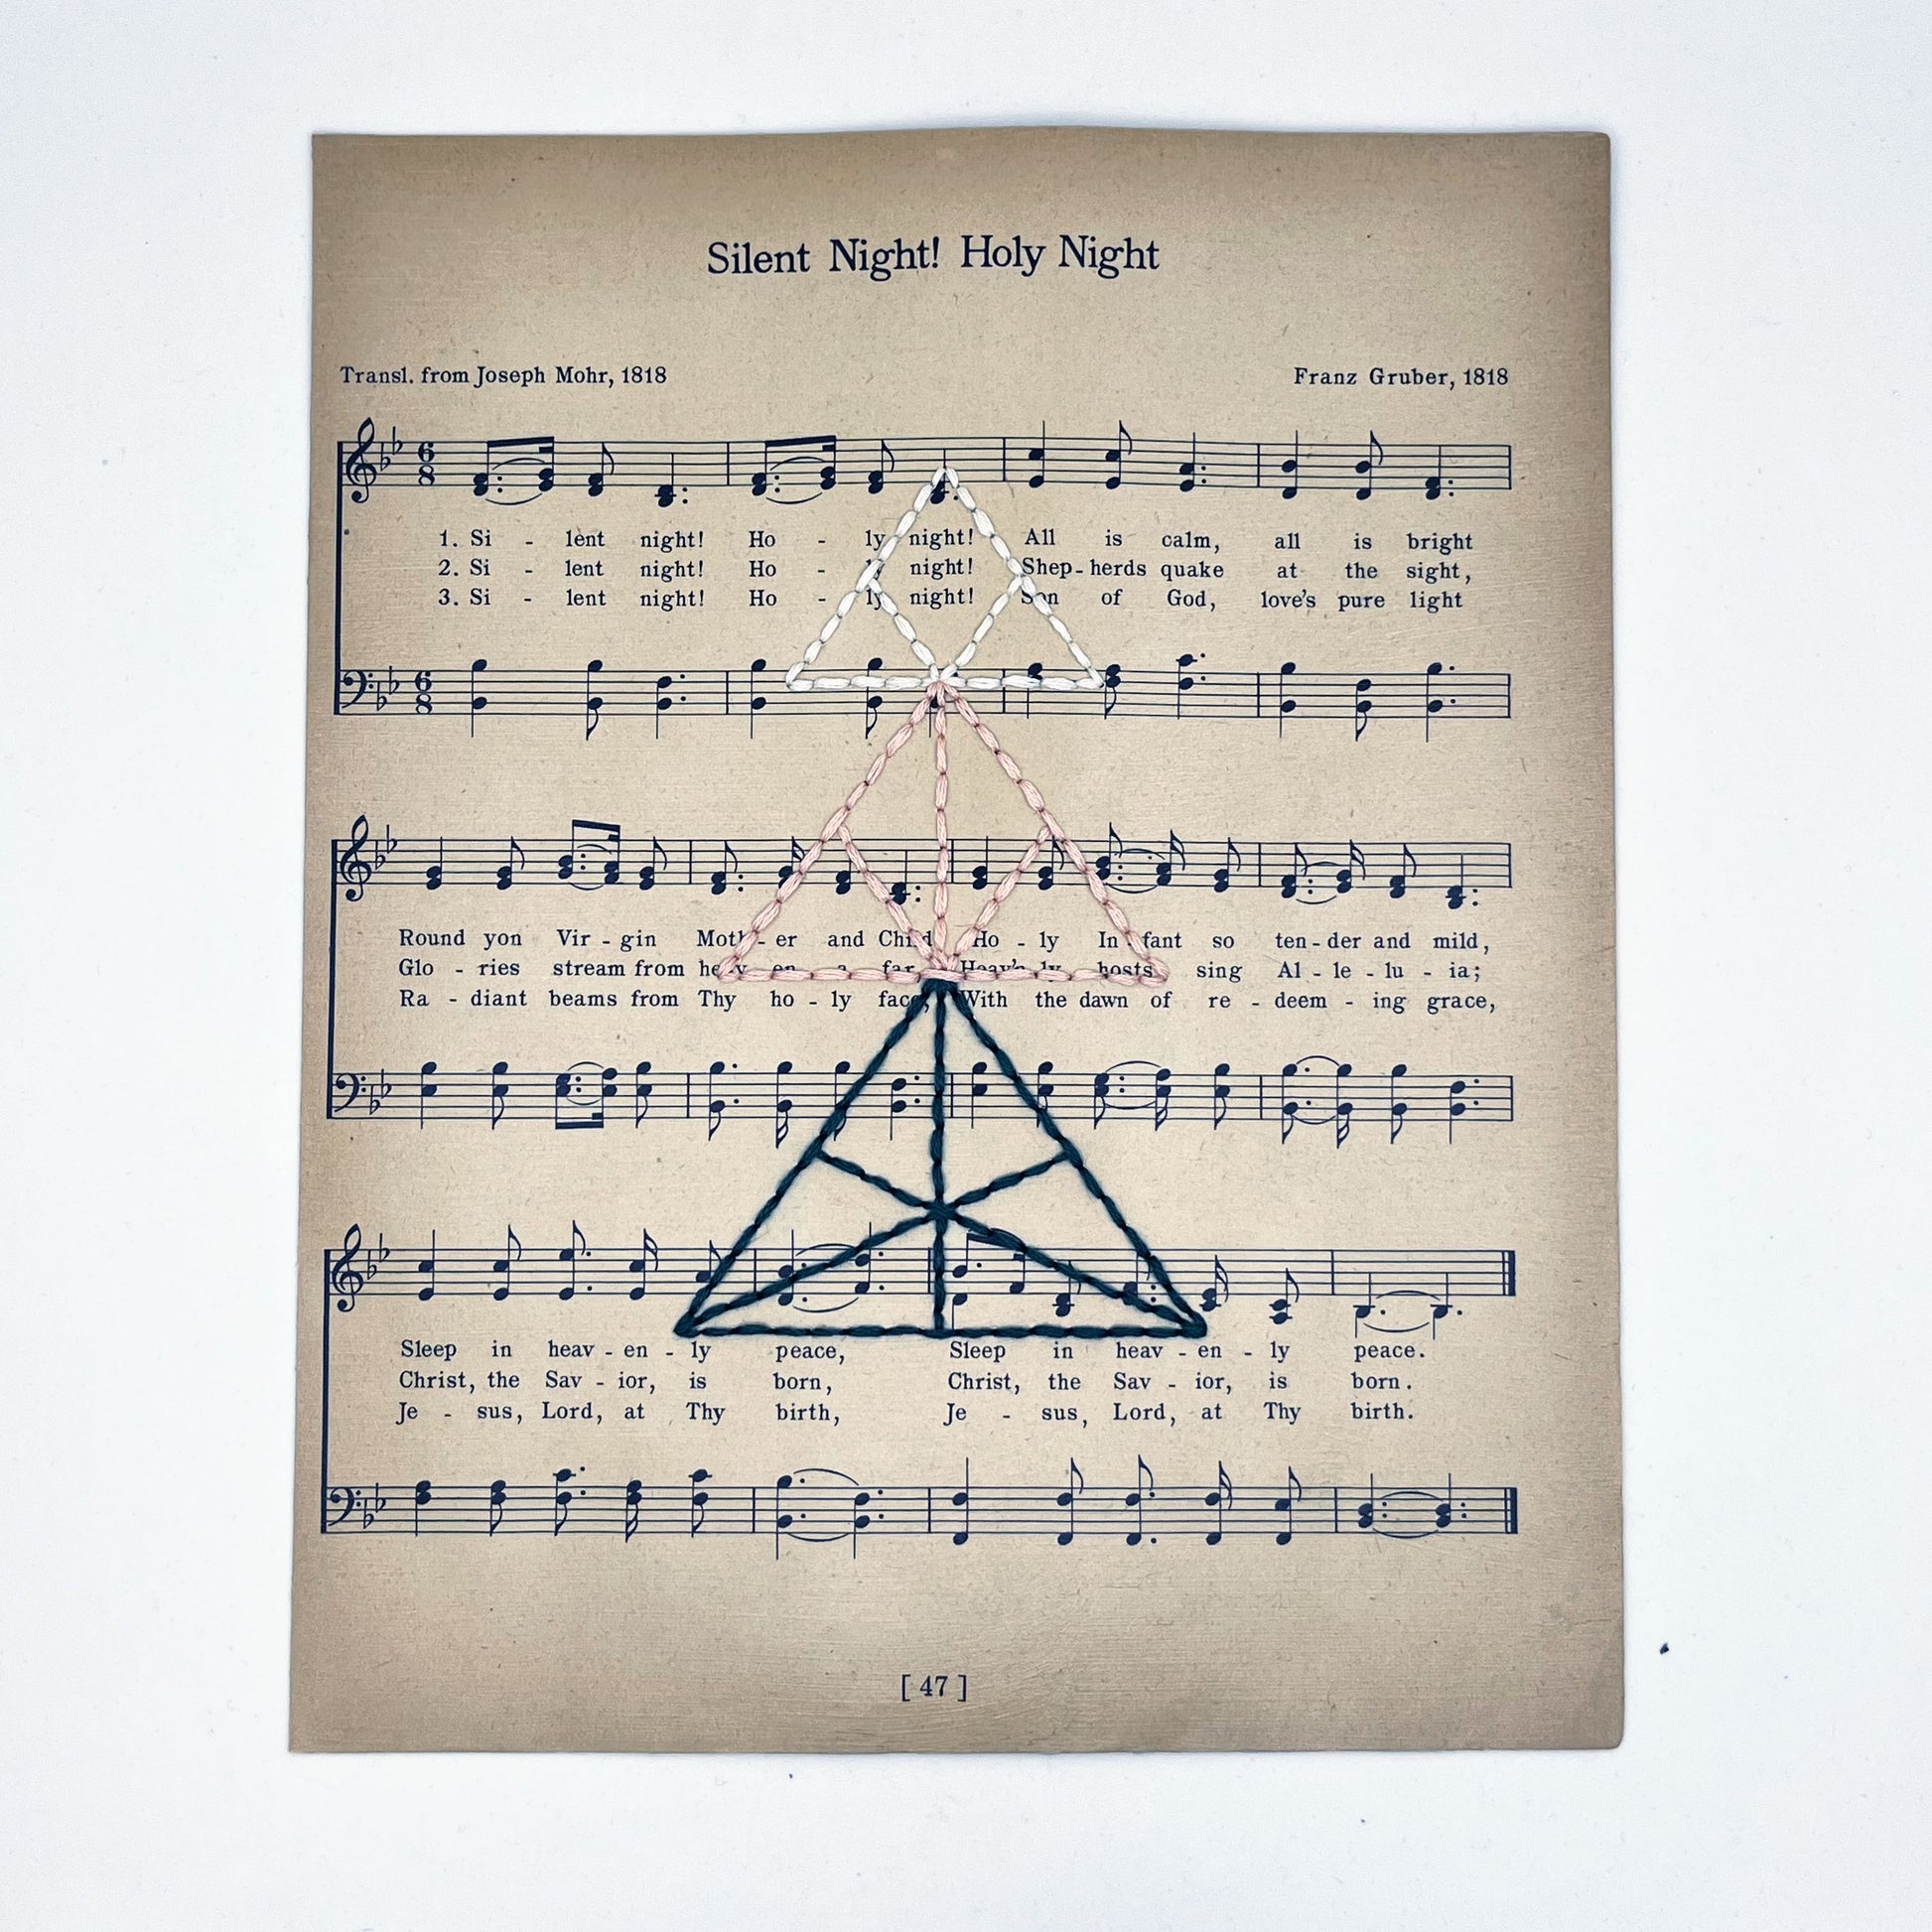 sheet music from the Christmas song "Silent Night", hand stitched over with a Christmas tree made from triangles, in green, peach and ivory thread